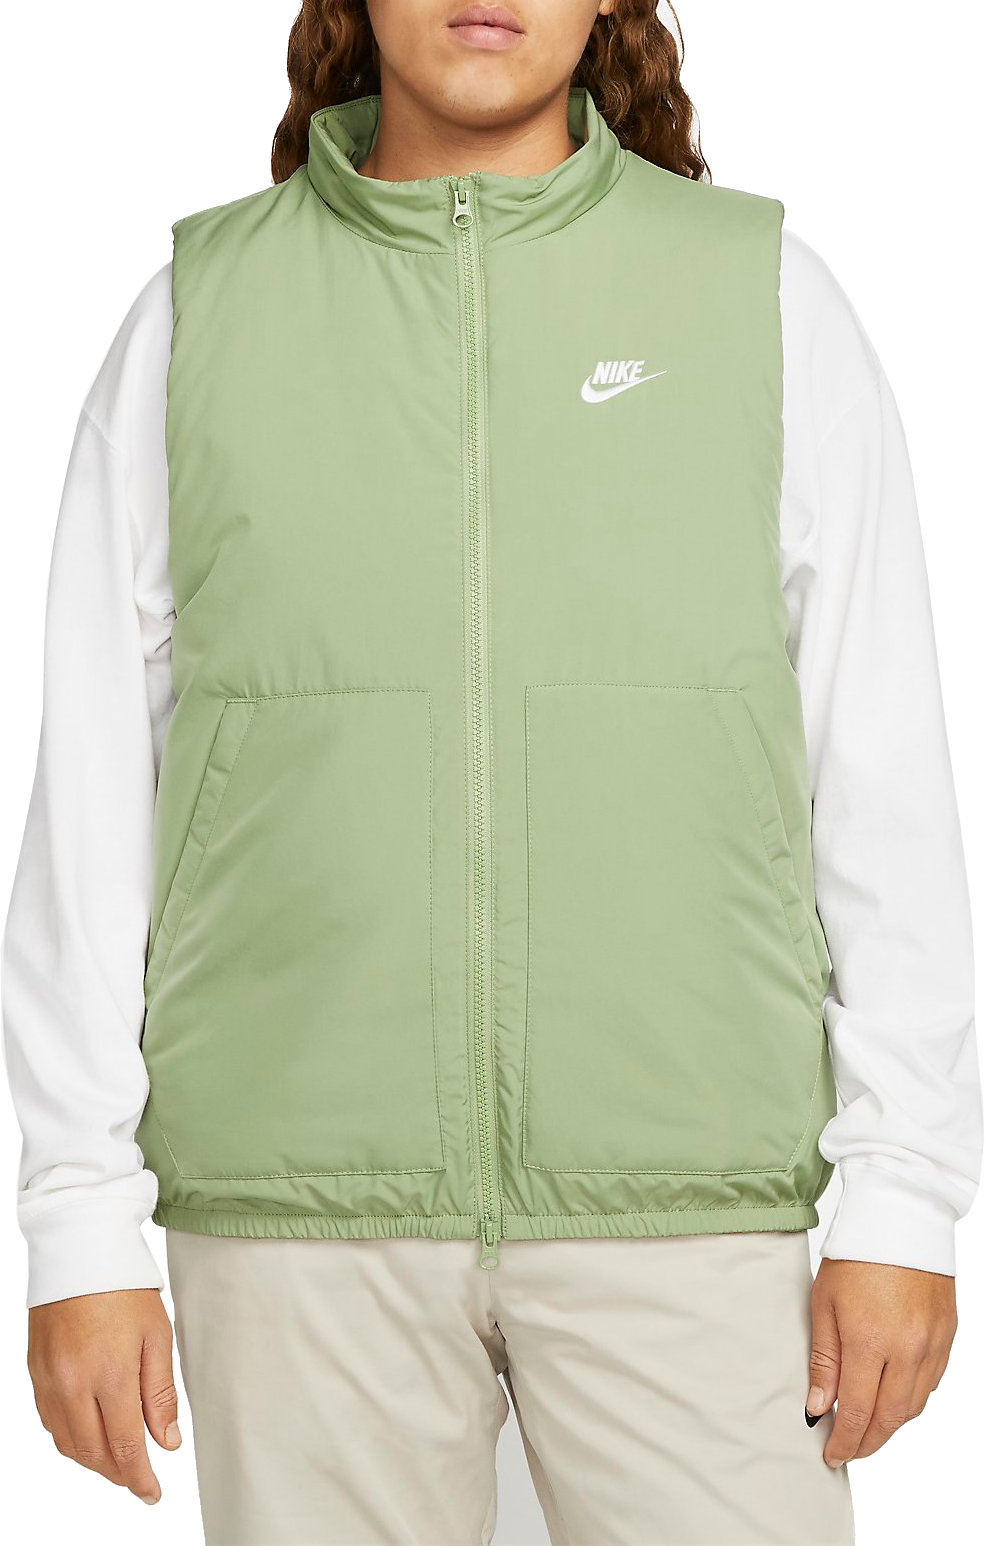 Елек Nike Therma-FIT Club - Men's Woven Insulated Gilet